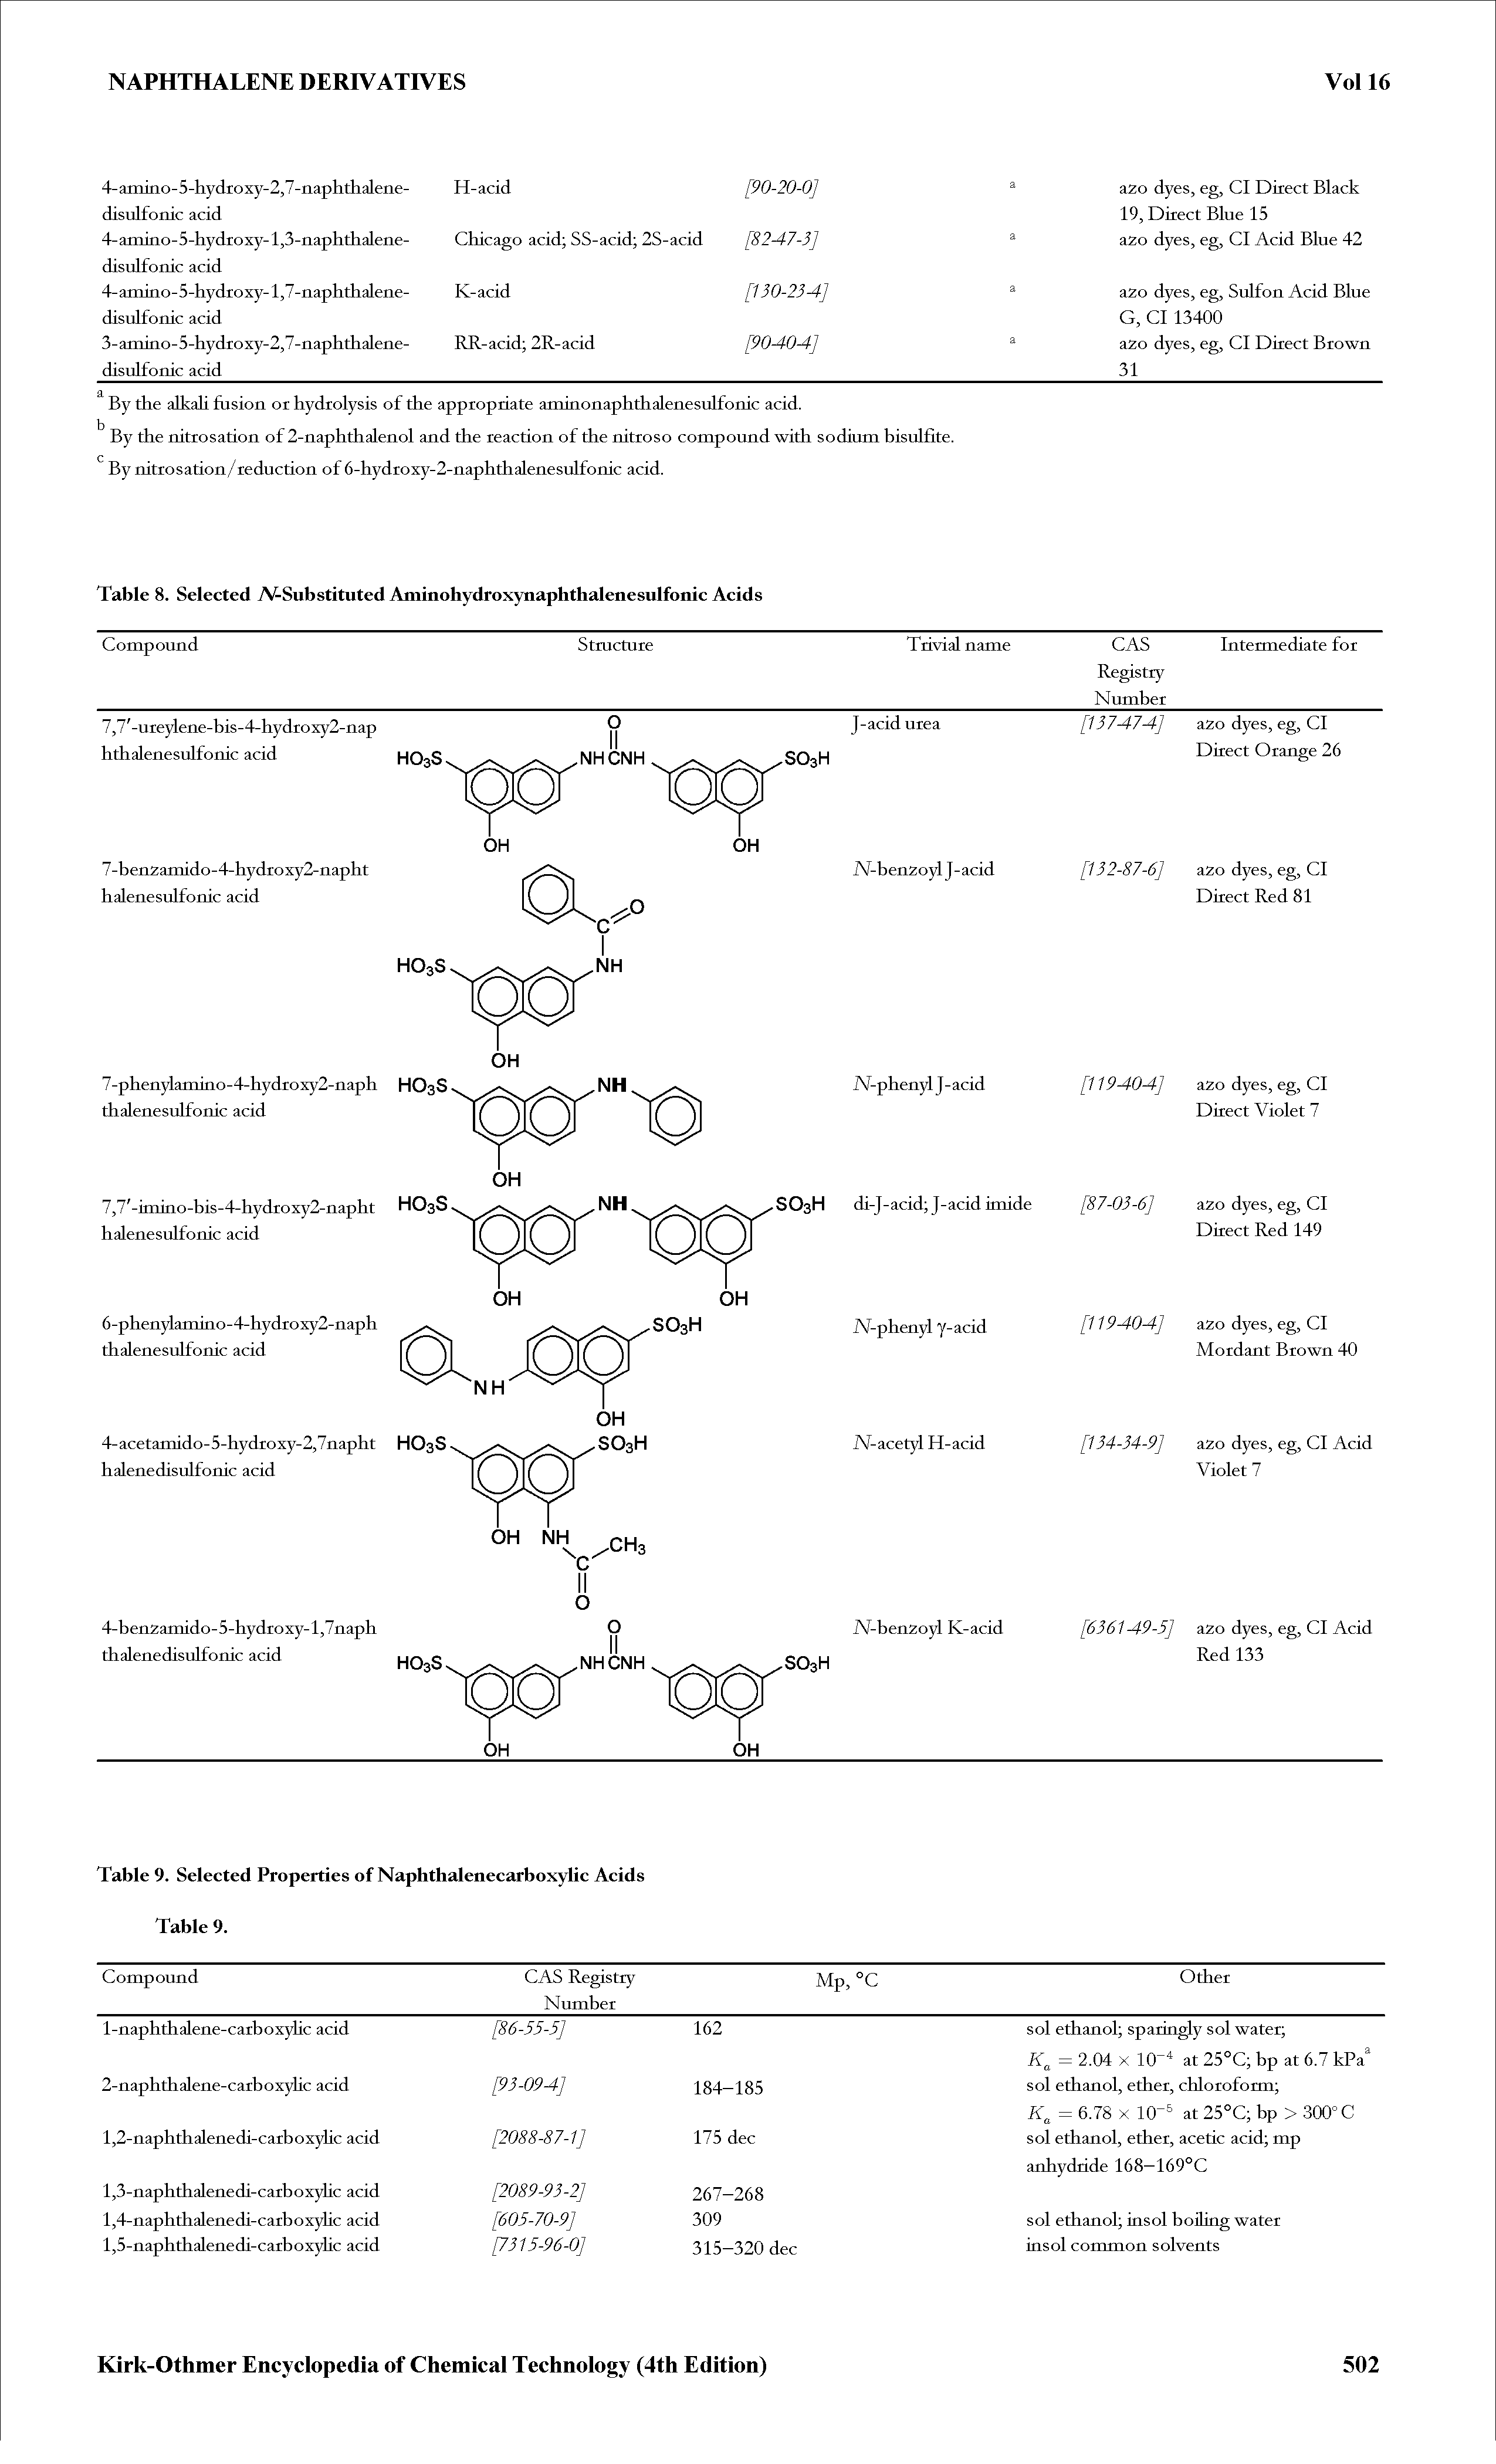 Table 9. Selected Properties of Naphthalenecarboxylic Acids Table 9.